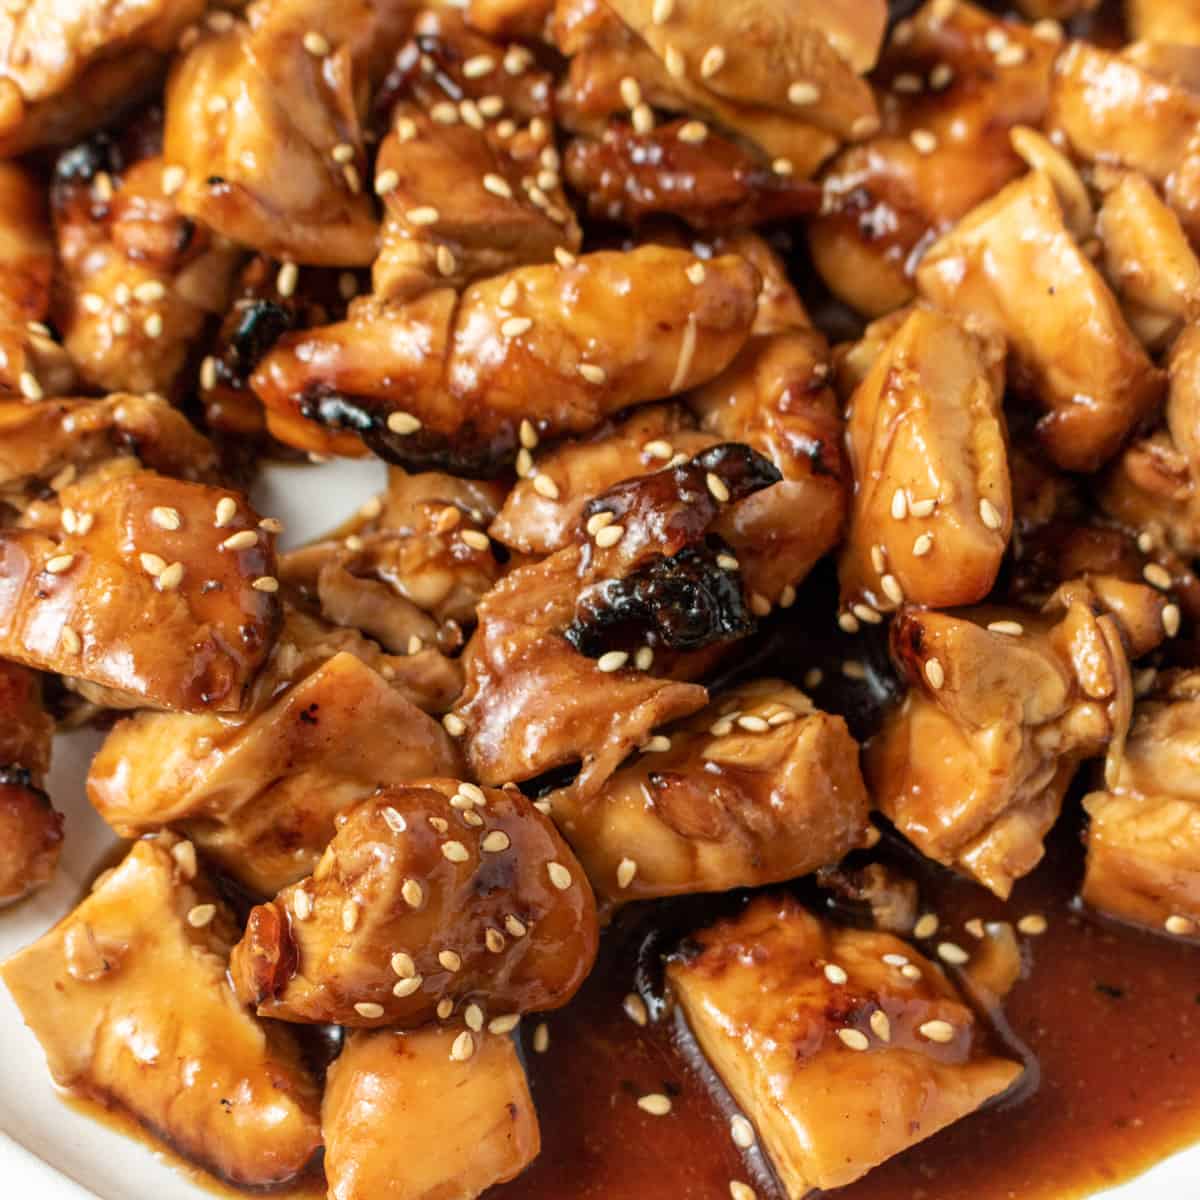 Cut up chicken thighs tossed in teriyaki sauce on a white plate garnished with white sesame seeds.